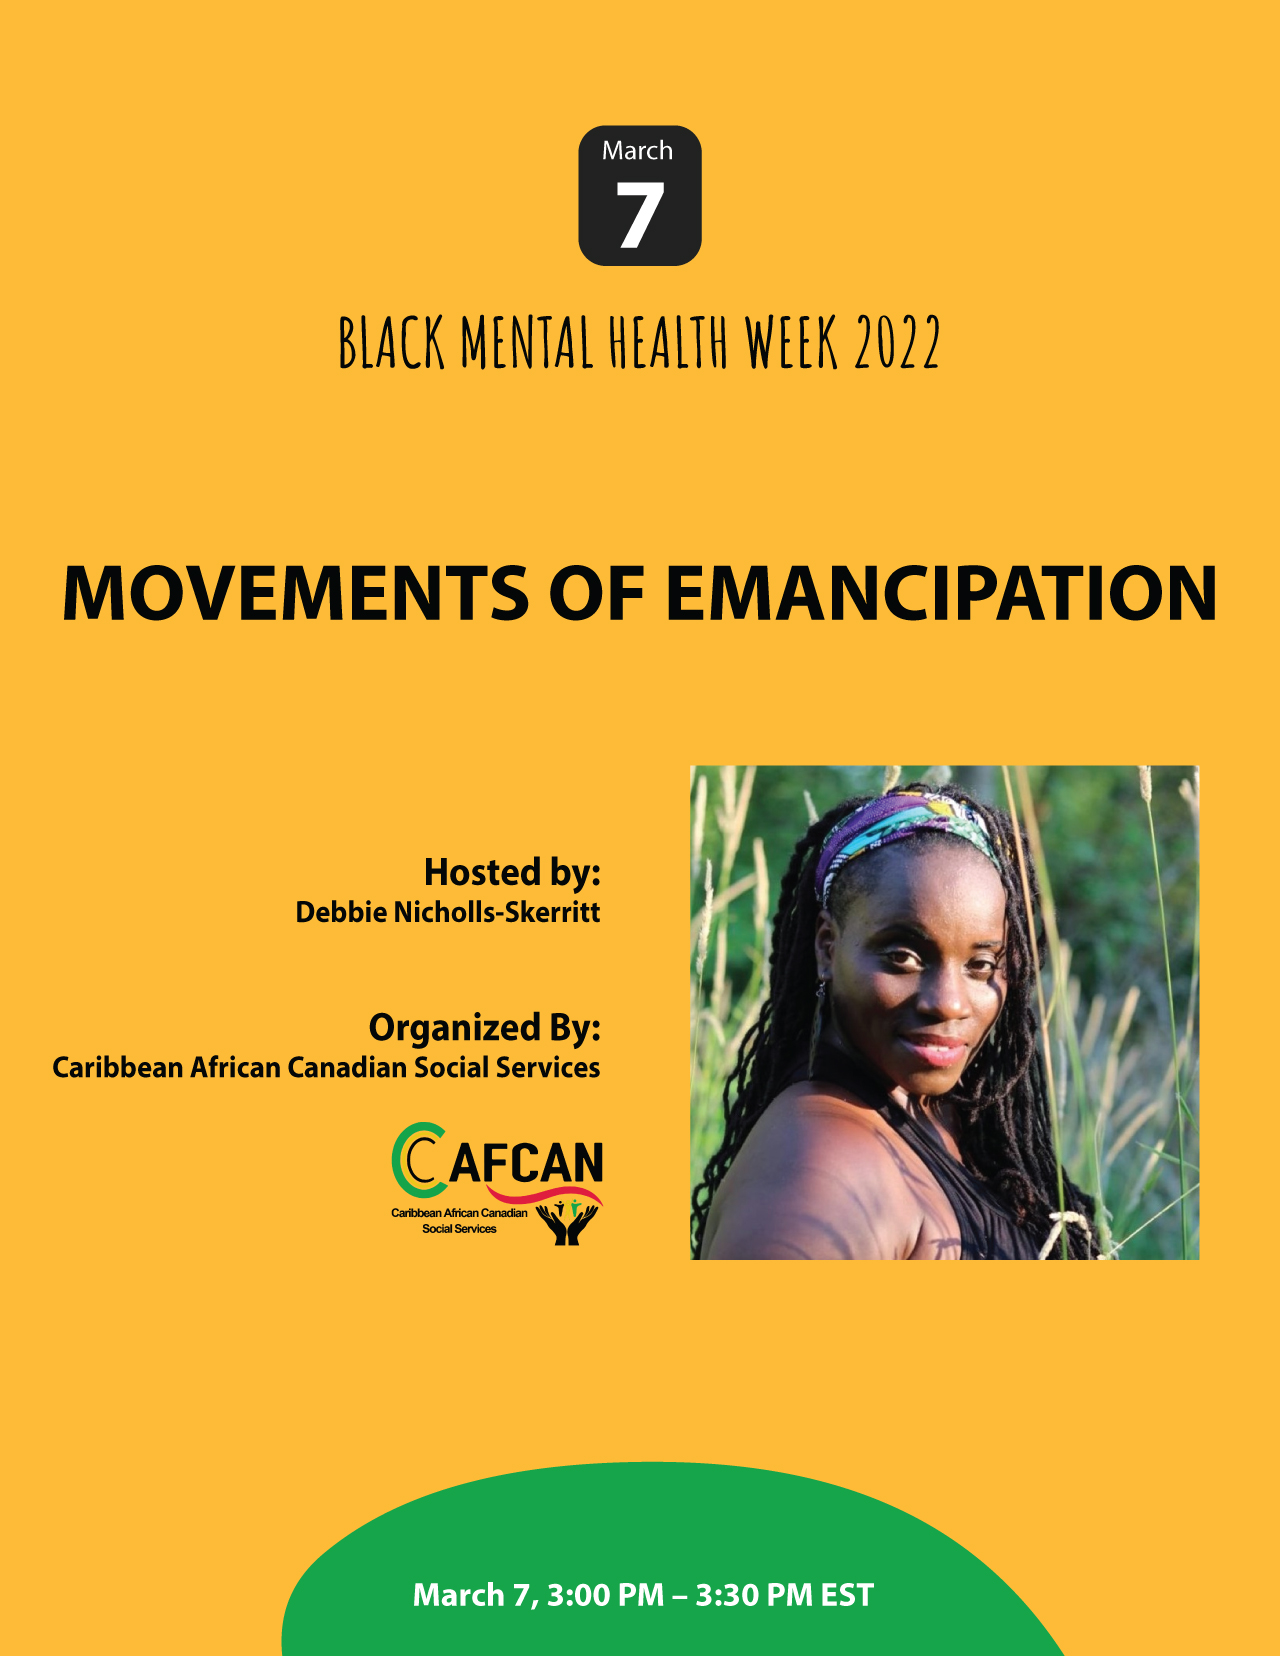 Movements of Emancipation: Caribbean African Canadian Social Services